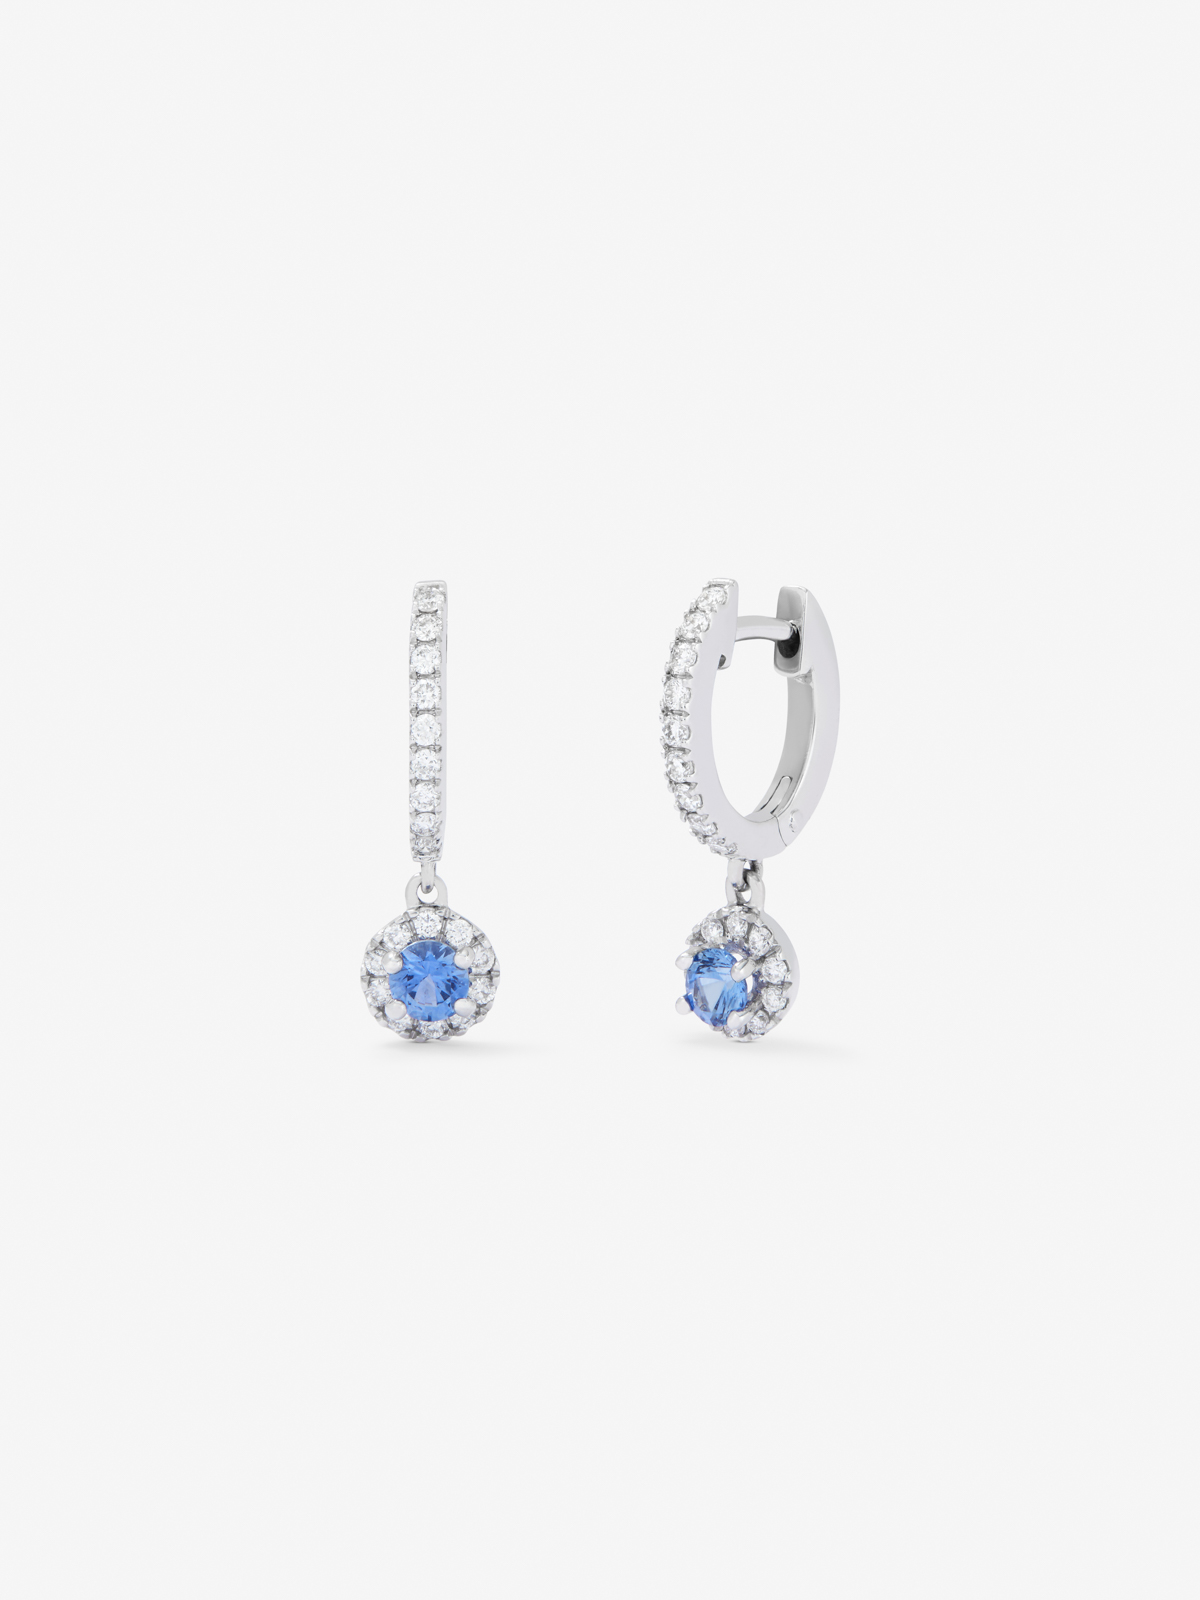 18K white gold hoop earrings with sapphire and diamond pendant